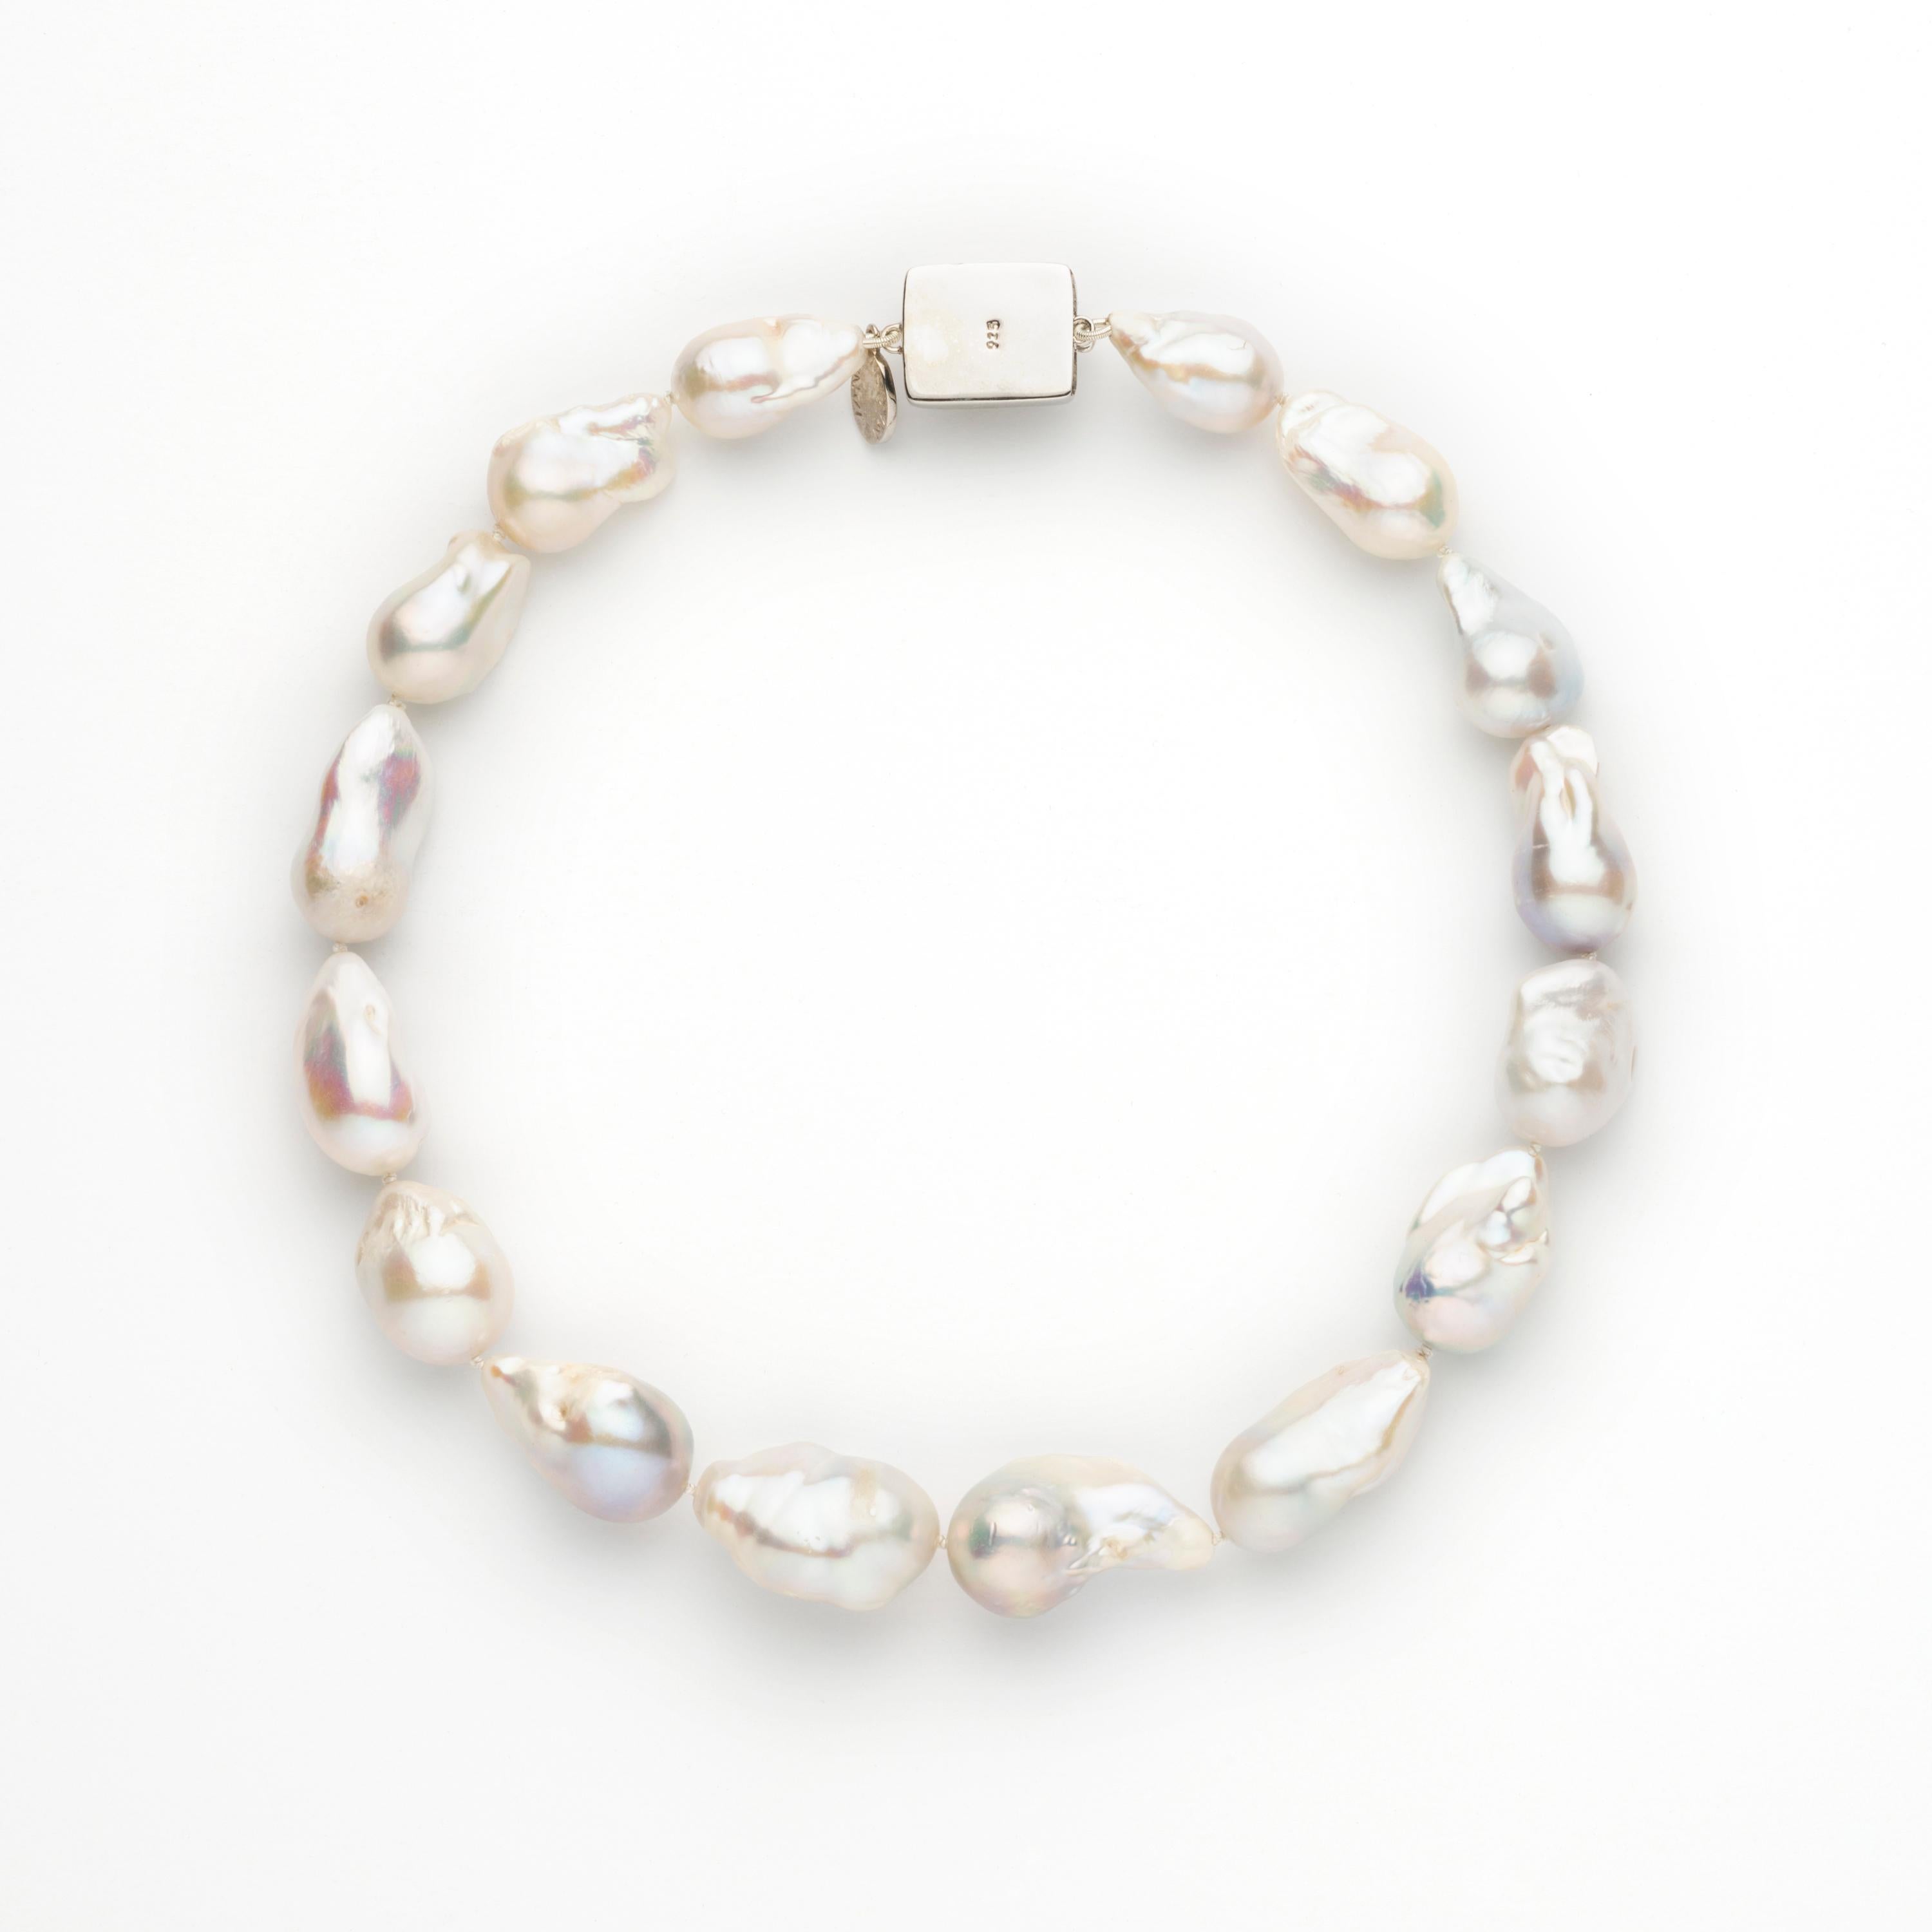 Jane Magon Collections, Soft Lustrous White Freshwater Pearl Necklace is approximately 14mm with slight graduation down. Individually knotted to the Rhodium Plated(so it won't tarnish and gives the look of platinum or white gold) Sterling Silver